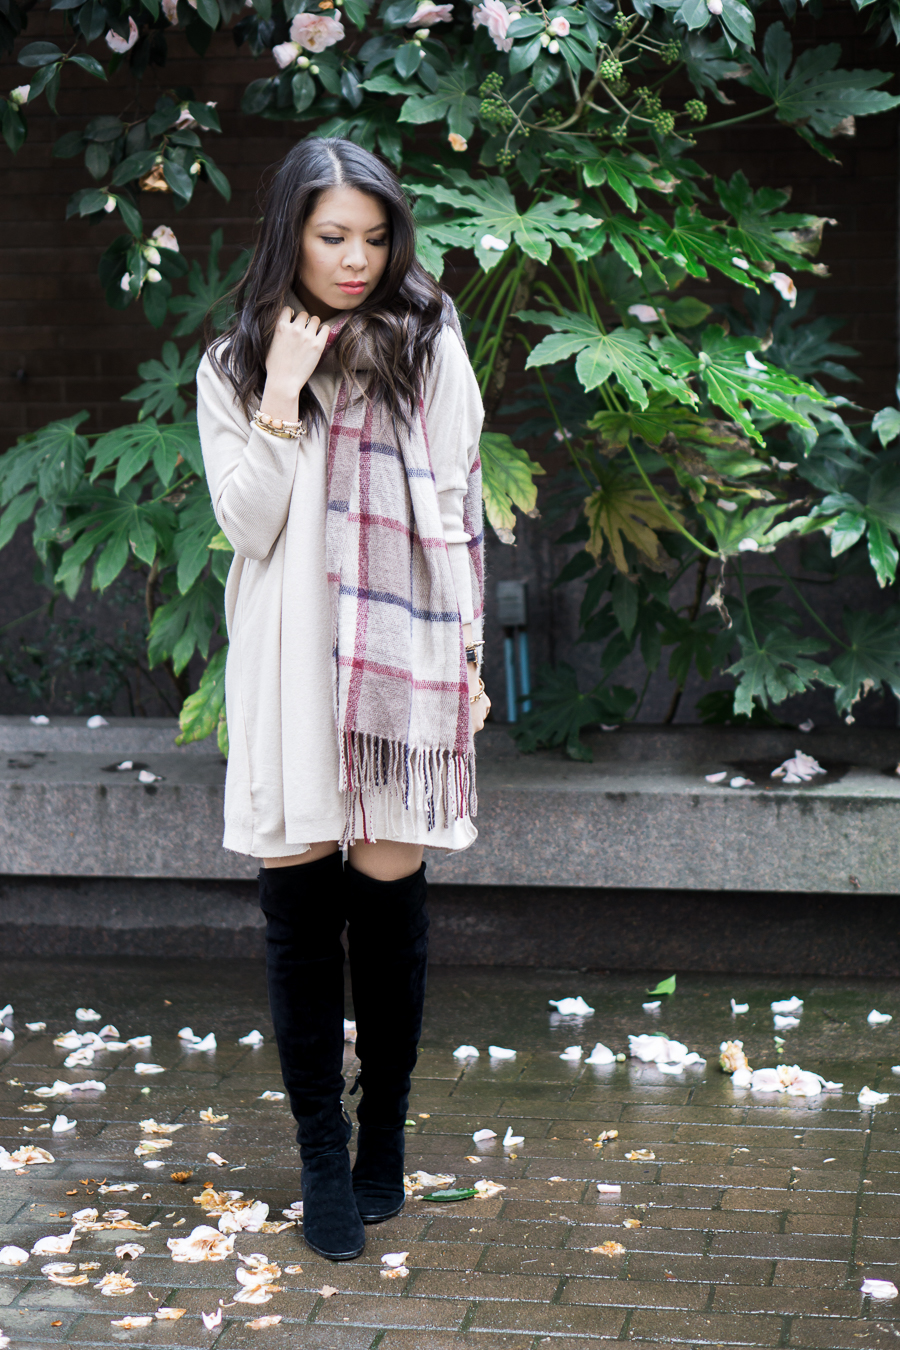 sweater dress over the knee boots outfit, asos tunic dress